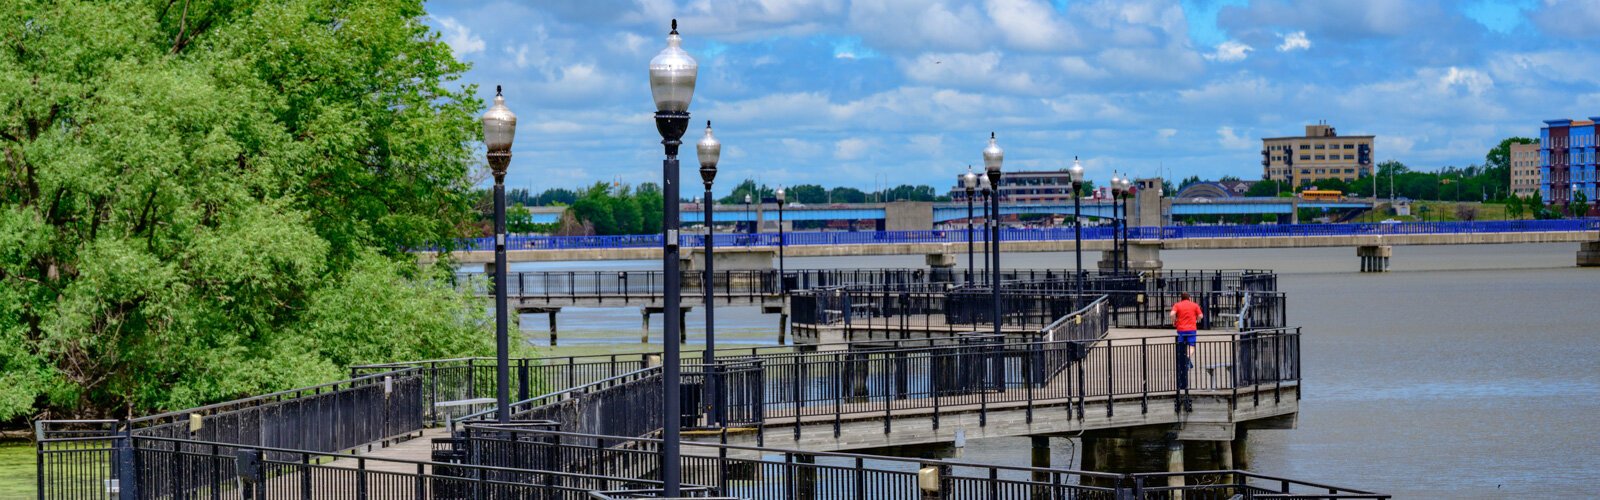 Riverfront parks in Bay City were one feature that attracted an international STEM conference to the region.